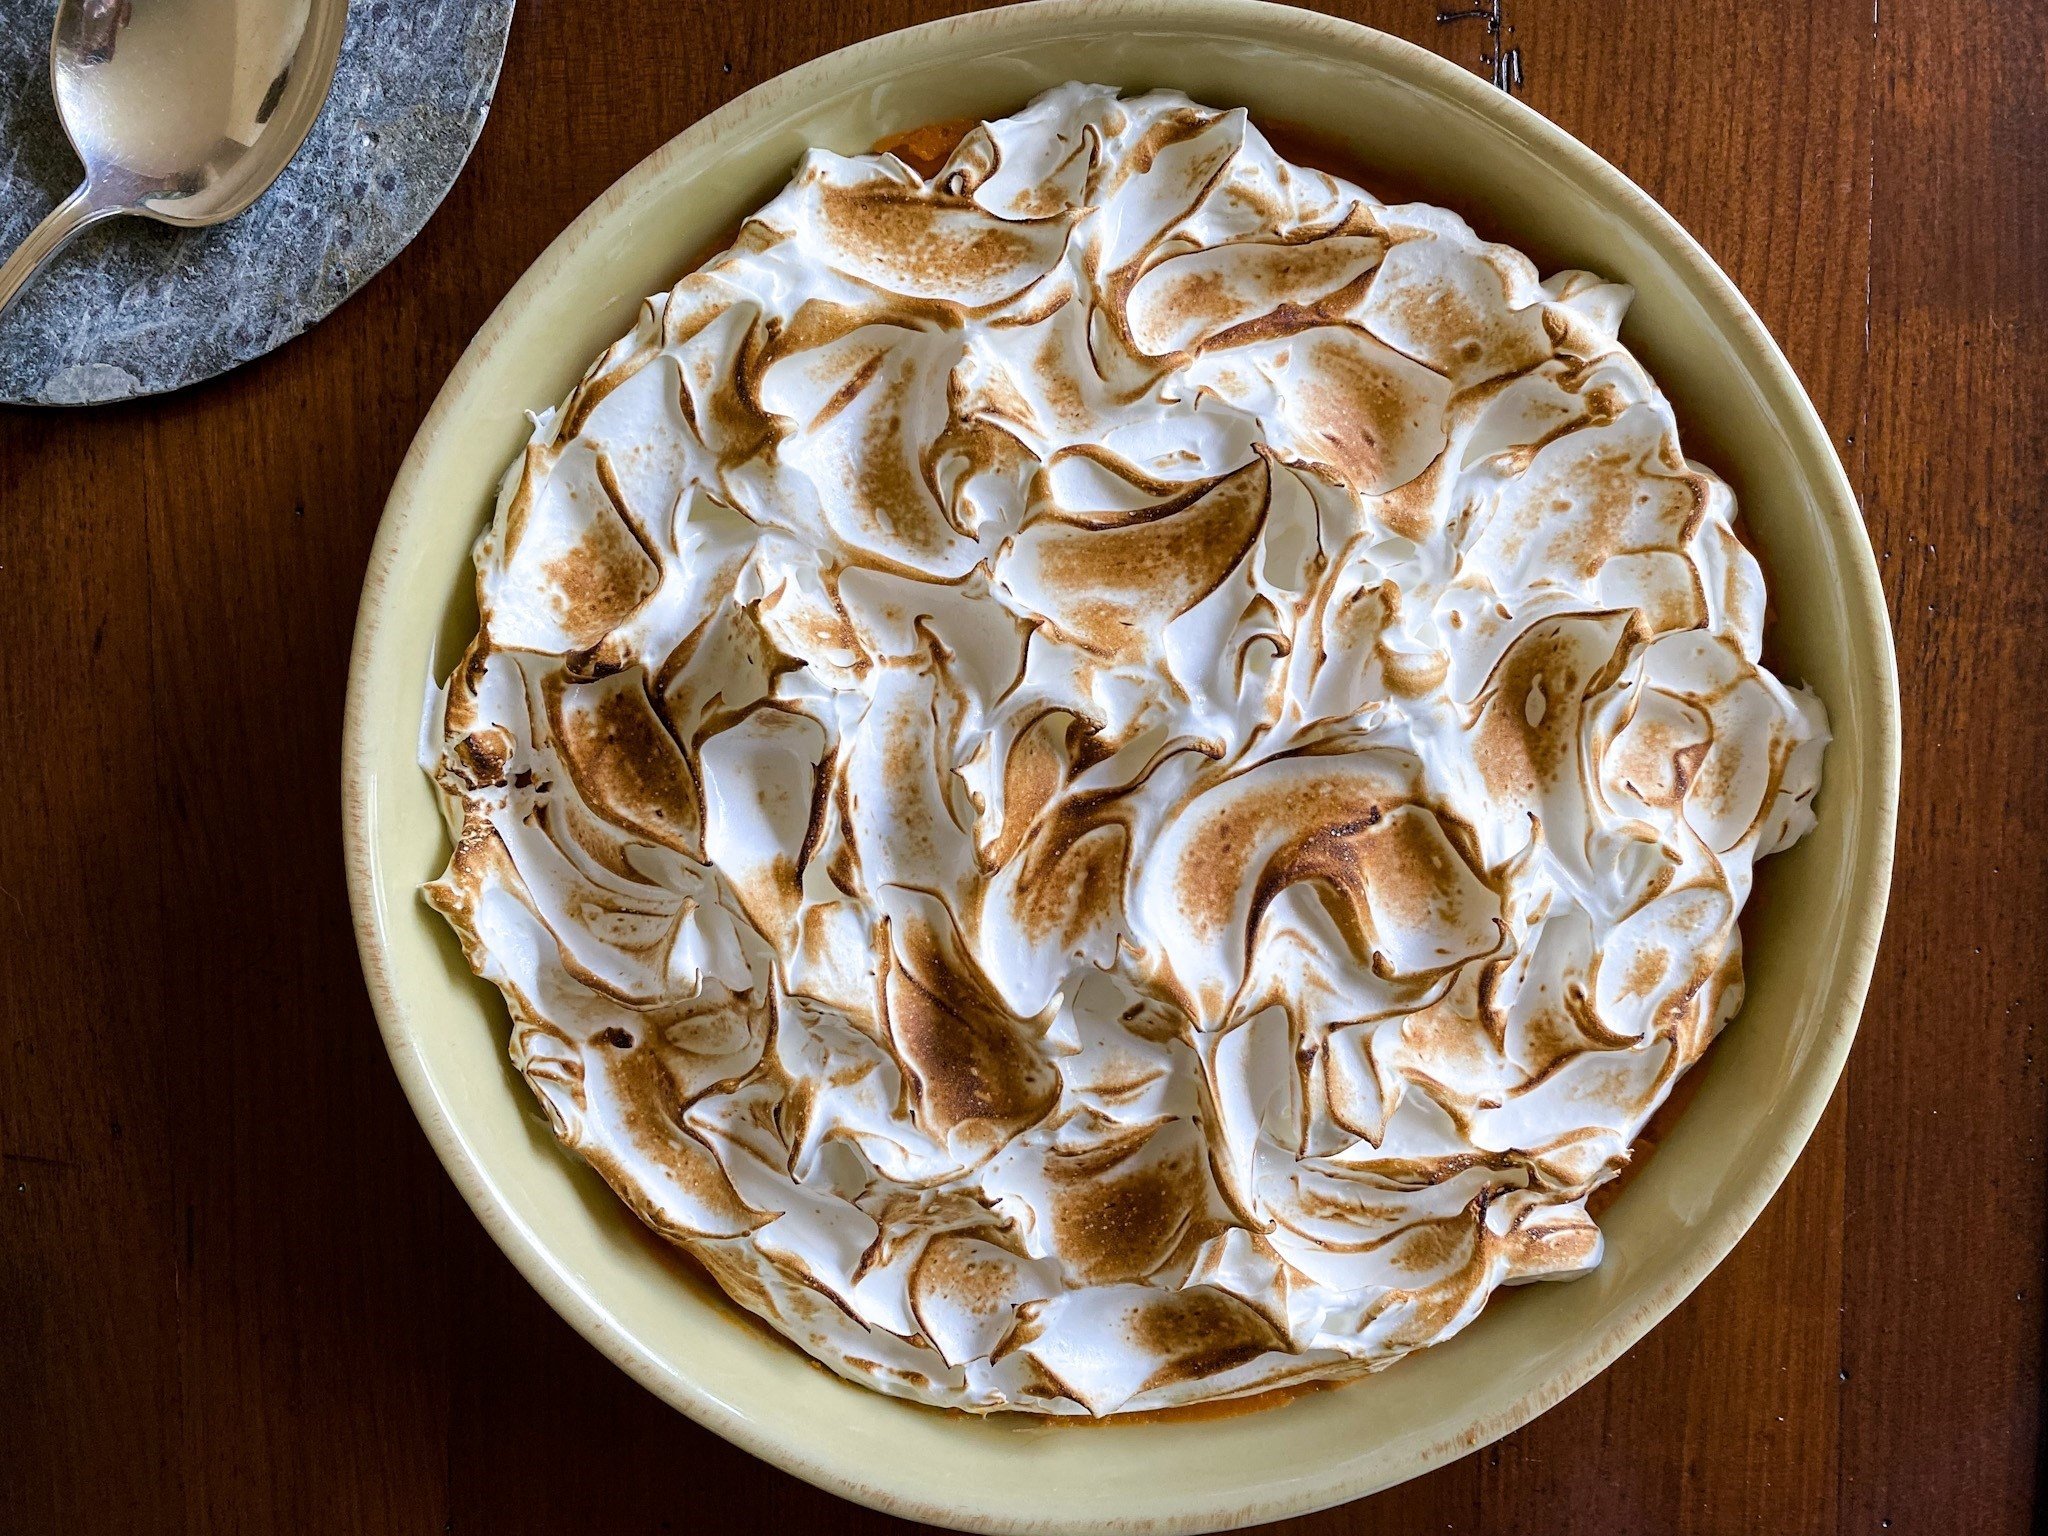 Mashed Sweet Potatoes with Fluffy Meringue Topping